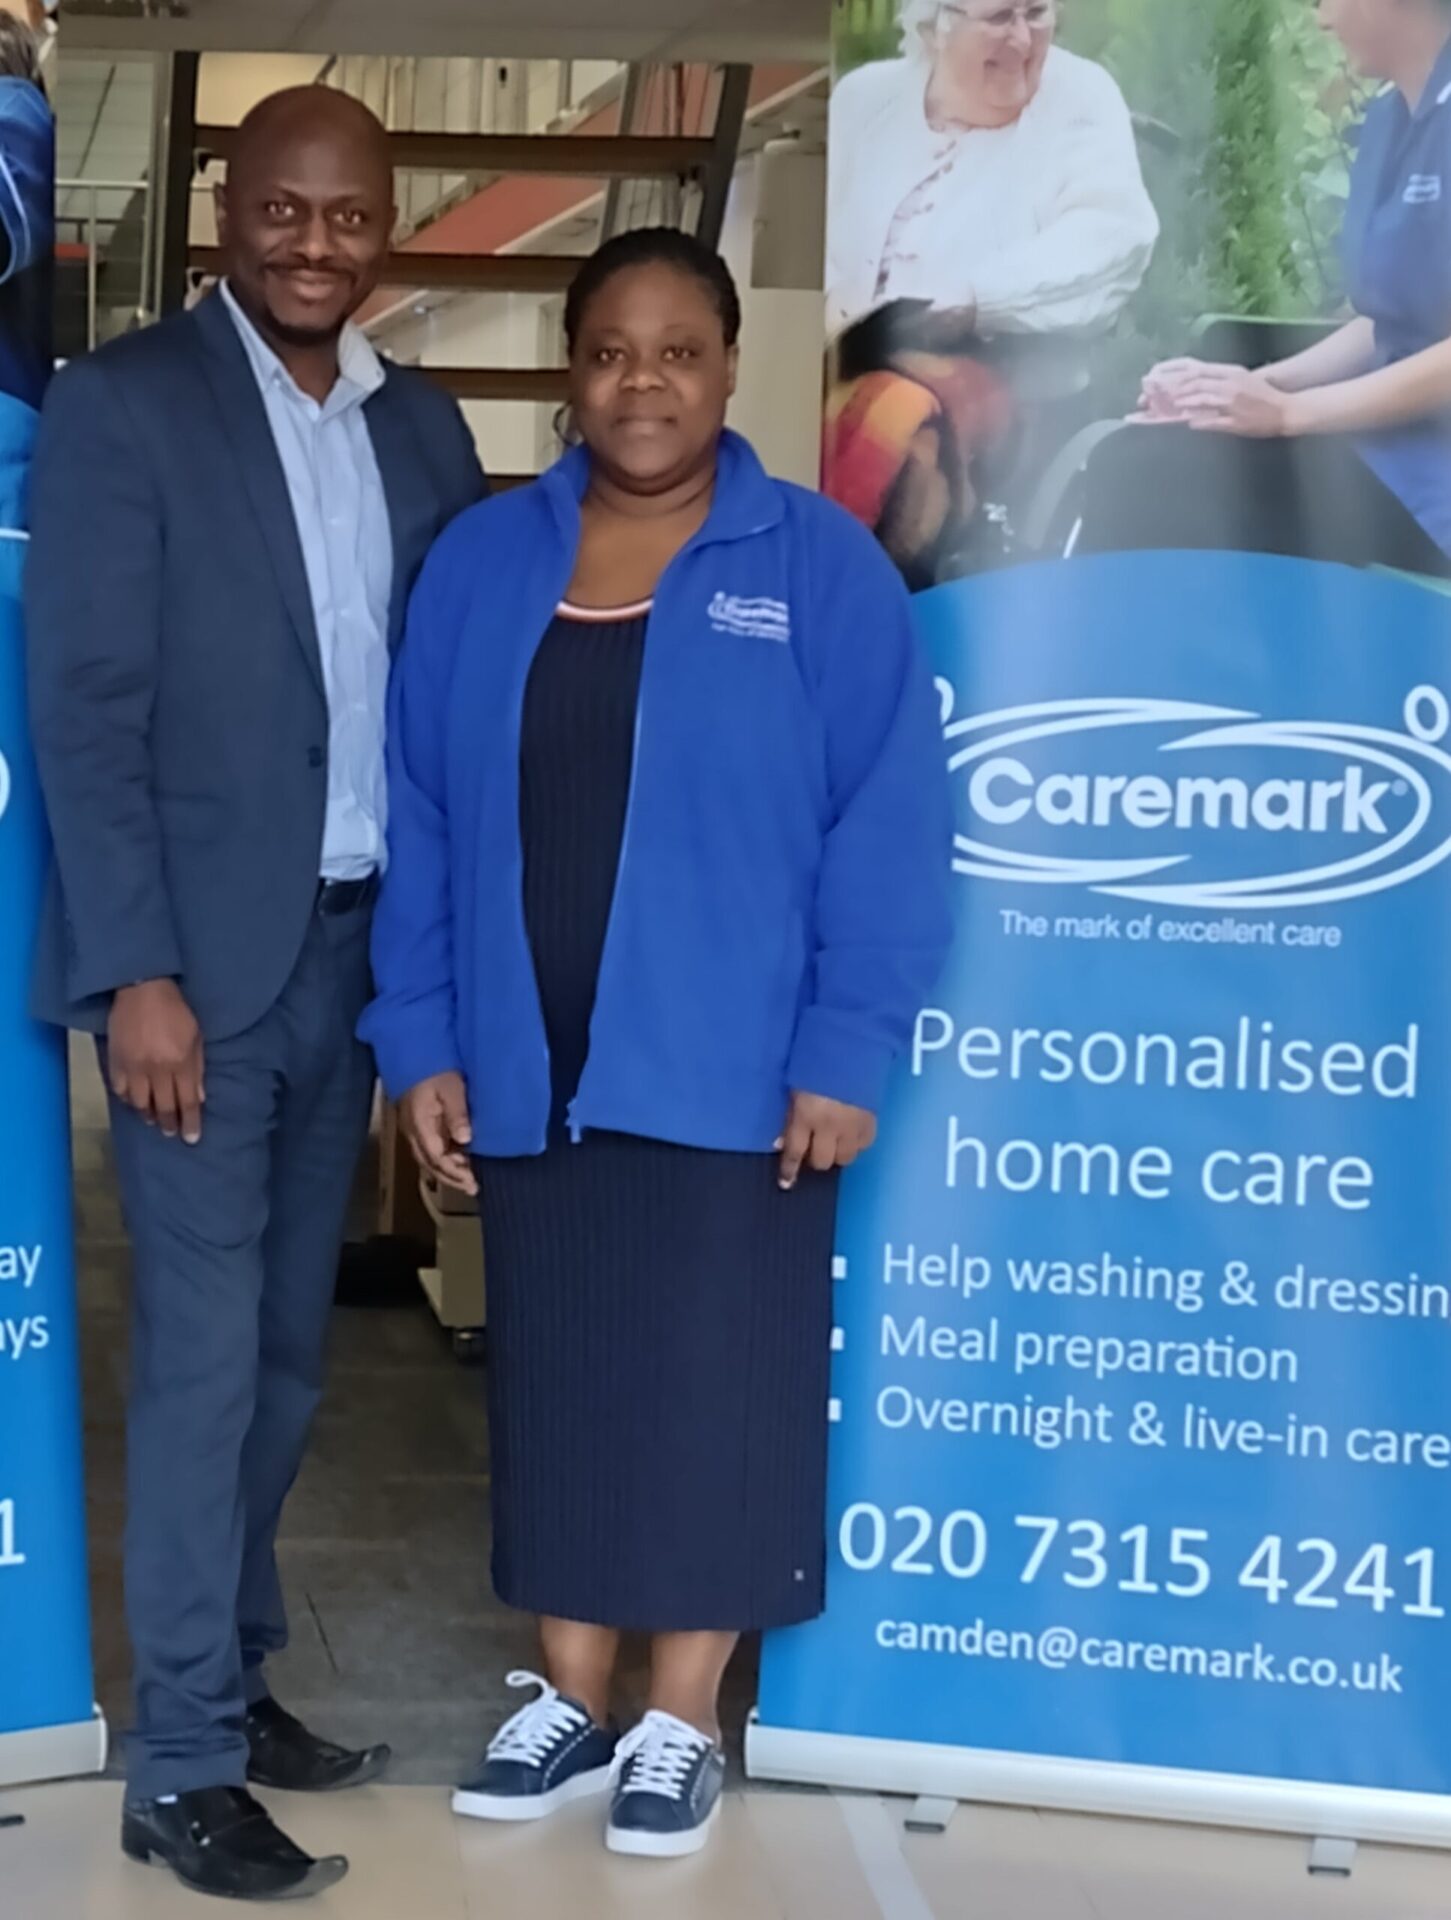 Husband & wife team’s franchised care business is thriving